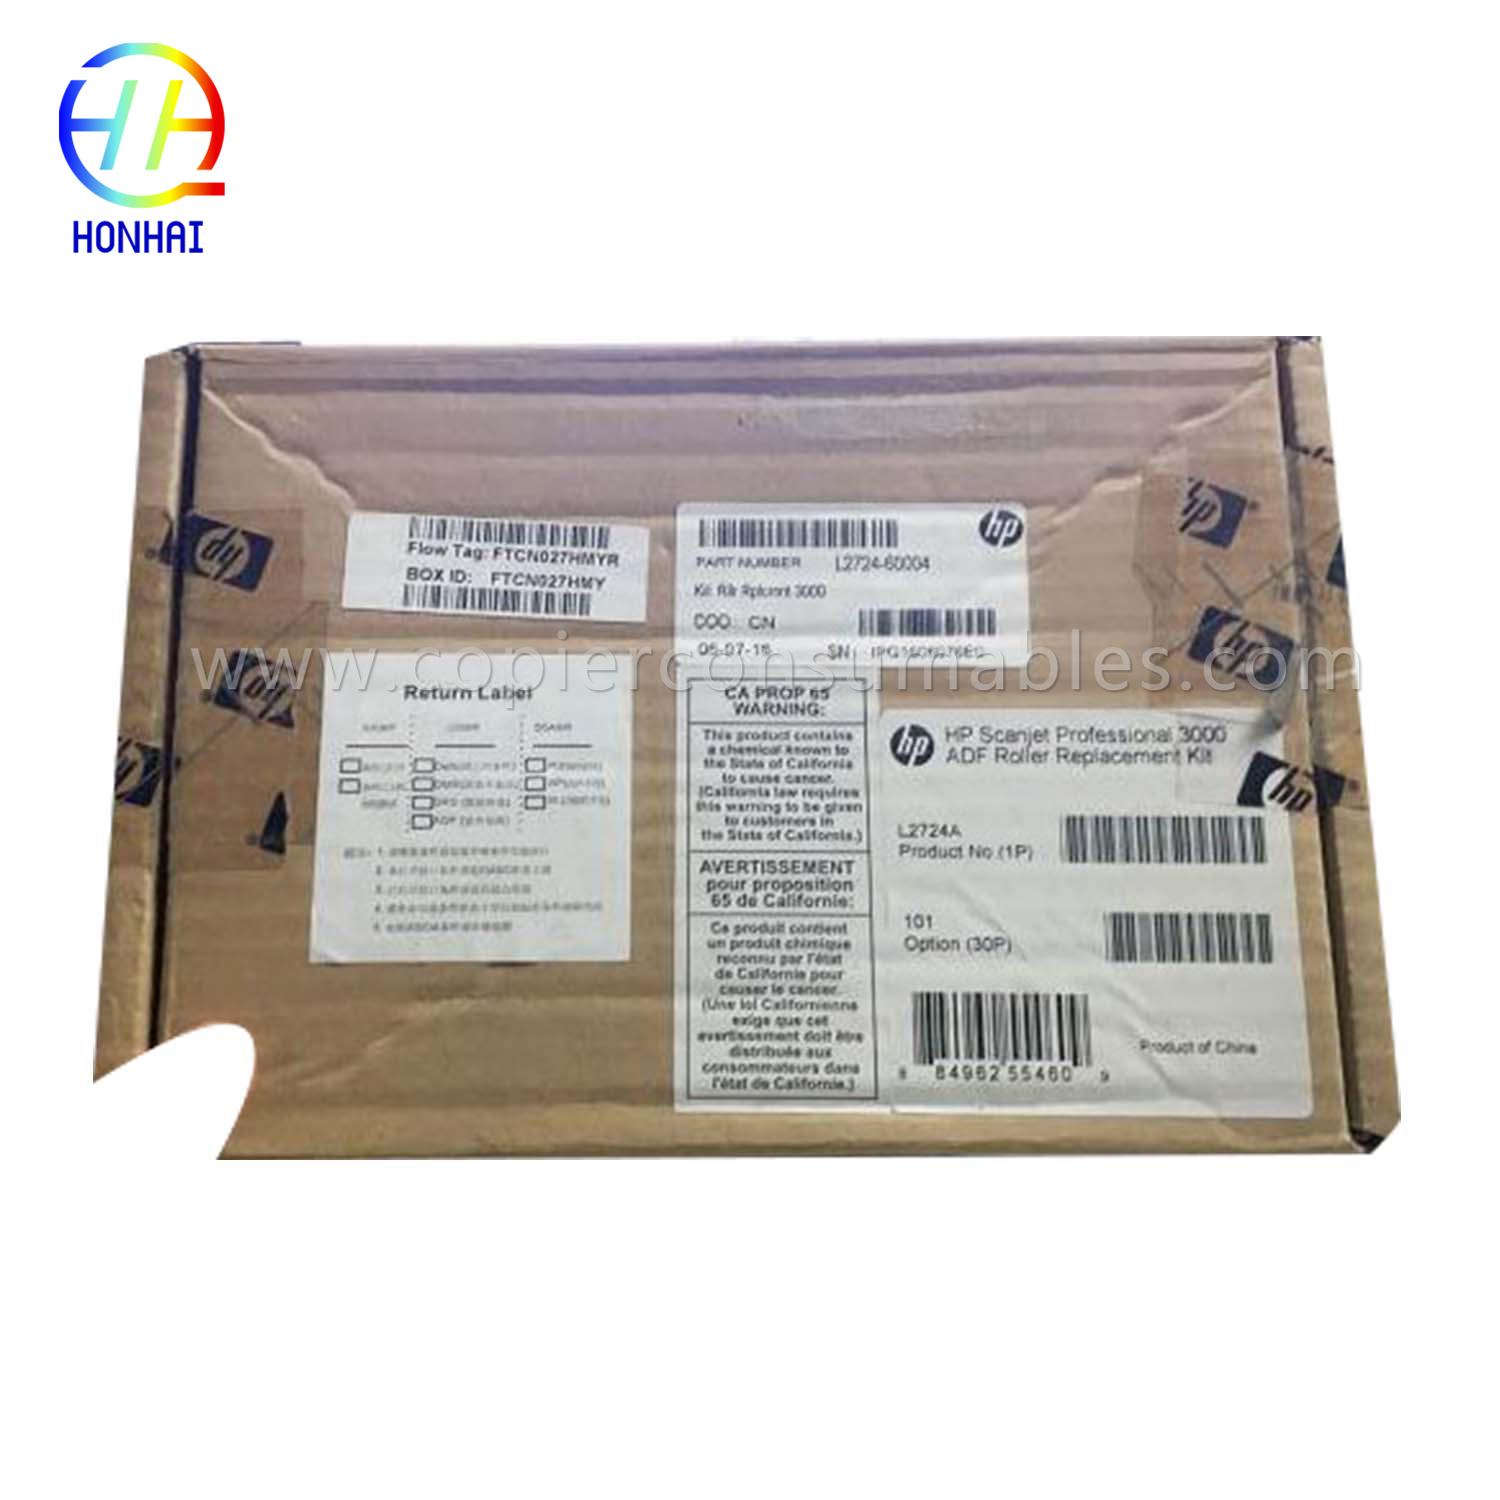 Adf Maintenance Kit for HP Scanjet 3000 S2 L2724A (2) 能否P走手指？ 拷贝